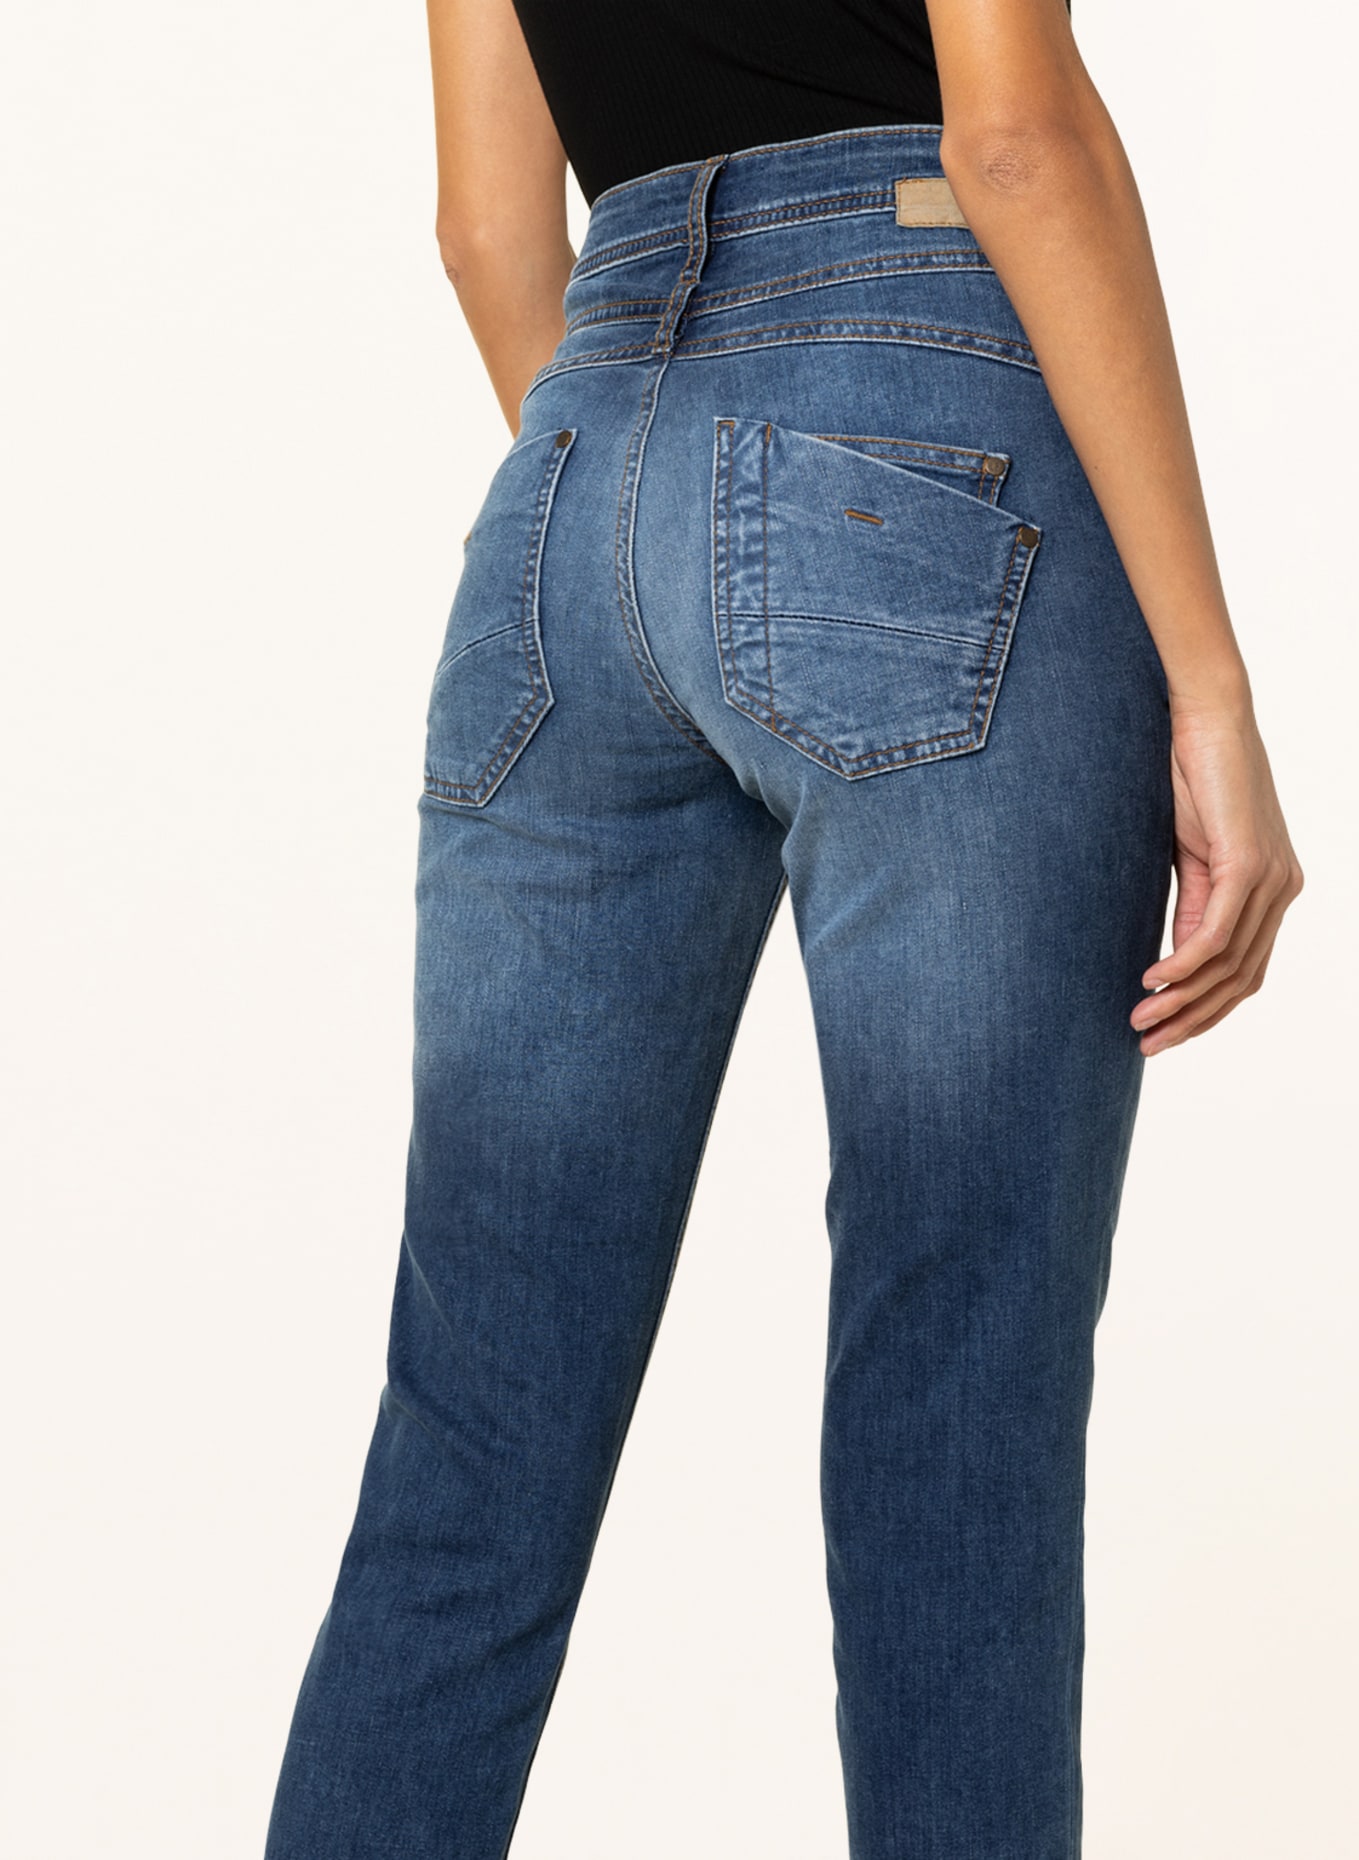 GANG Jeans AMELIE, Farbe: 7188 universal class wash (Bild 5)